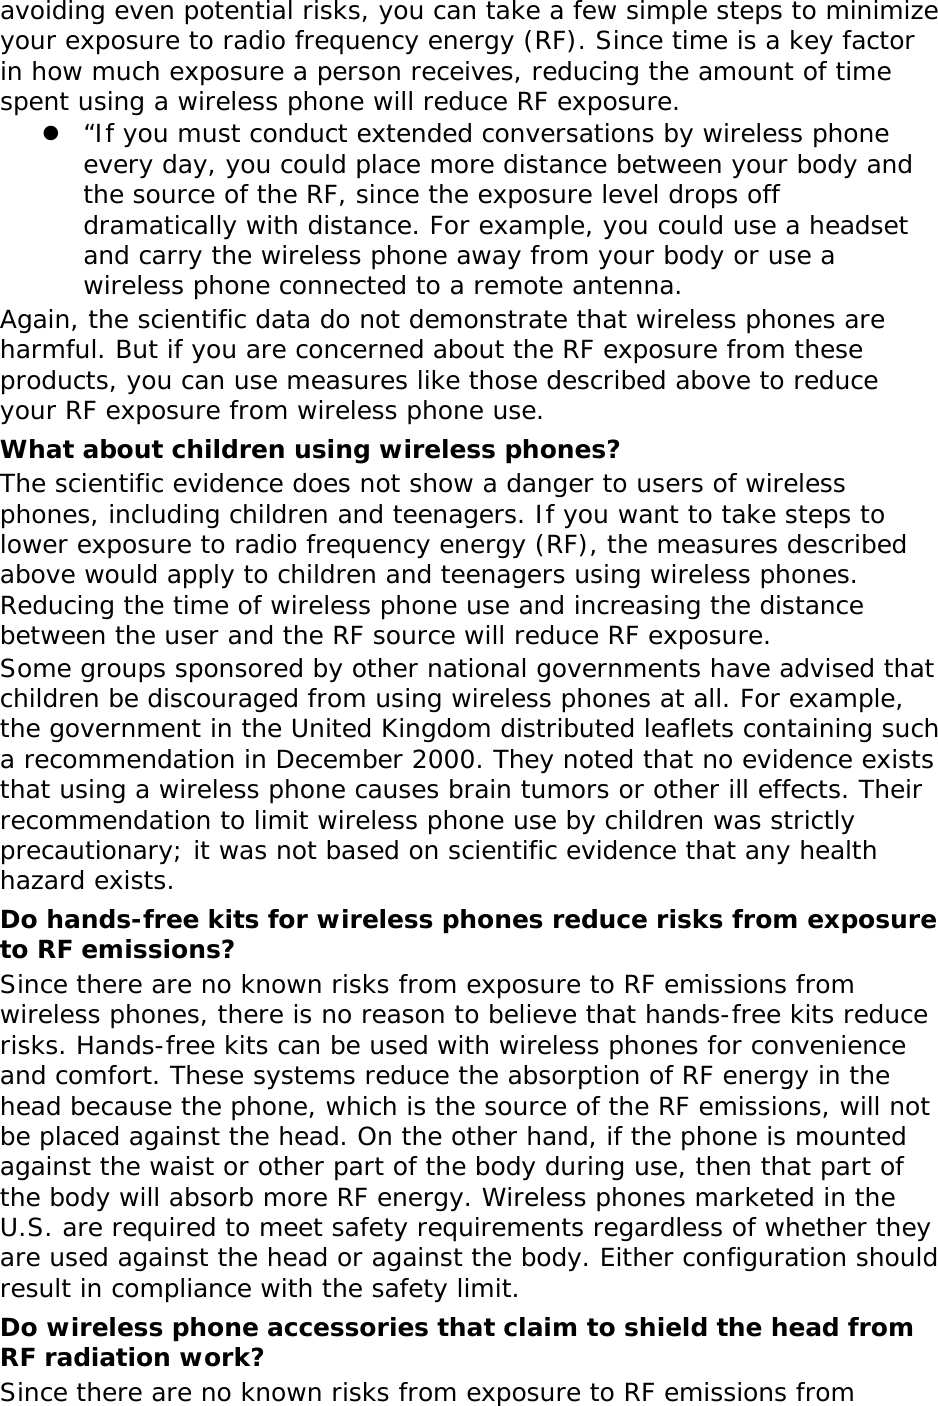 avoiding even potential risks, you can take a few simple steps to minimize your exposure to radio frequency energy (RF). Since time is a key factor in how much exposure a person receives, reducing the amount of time spent using a wireless phone will reduce RF exposure. z “If you must conduct extended conversations by wireless phone every day, you could place more distance between your body and the source of the RF, since the exposure level drops off dramatically with distance. For example, you could use a headset and carry the wireless phone away from your body or use a wireless phone connected to a remote antenna. Again, the scientific data do not demonstrate that wireless phones are harmful. But if you are concerned about the RF exposure from these products, you can use measures like those described above to reduce your RF exposure from wireless phone use. What about children using wireless phones? The scientific evidence does not show a danger to users of wireless phones, including children and teenagers. If you want to take steps to lower exposure to radio frequency energy (RF), the measures described above would apply to children and teenagers using wireless phones. Reducing the time of wireless phone use and increasing the distance between the user and the RF source will reduce RF exposure. Some groups sponsored by other national governments have advised that children be discouraged from using wireless phones at all. For example, the government in the United Kingdom distributed leaflets containing such a recommendation in December 2000. They noted that no evidence exists that using a wireless phone causes brain tumors or other ill effects. Their recommendation to limit wireless phone use by children was strictly precautionary; it was not based on scientific evidence that any health hazard exists.  Do hands-free kits for wireless phones reduce risks from exposure to RF emissions? Since there are no known risks from exposure to RF emissions from wireless phones, there is no reason to believe that hands-free kits reduce risks. Hands-free kits can be used with wireless phones for convenience and comfort. These systems reduce the absorption of RF energy in the head because the phone, which is the source of the RF emissions, will not be placed against the head. On the other hand, if the phone is mounted against the waist or other part of the body during use, then that part of the body will absorb more RF energy. Wireless phones marketed in the U.S. are required to meet safety requirements regardless of whether they are used against the head or against the body. Either configuration should result in compliance with the safety limit. Do wireless phone accessories that claim to shield the head from RF radiation work? Since there are no known risks from exposure to RF emissions from 